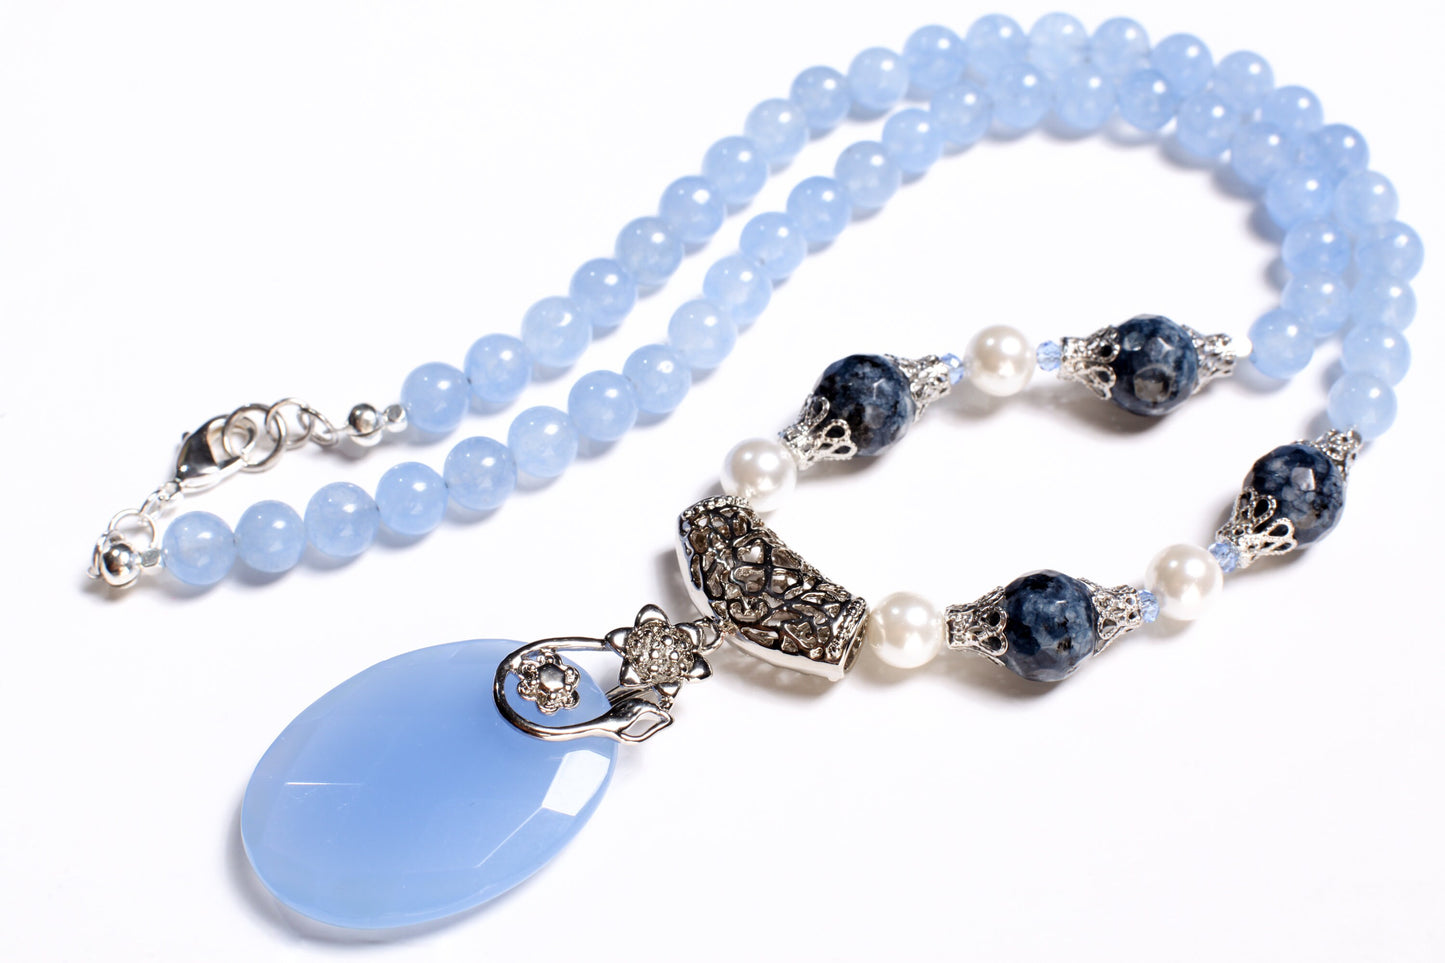 Periwinkle Blue Chalcedony 29x39mm Oval Pendant with Fancy Rhodium Bail, South Sea Shell Pearl Bali Style Necklace 8mm Round 22" Necklace